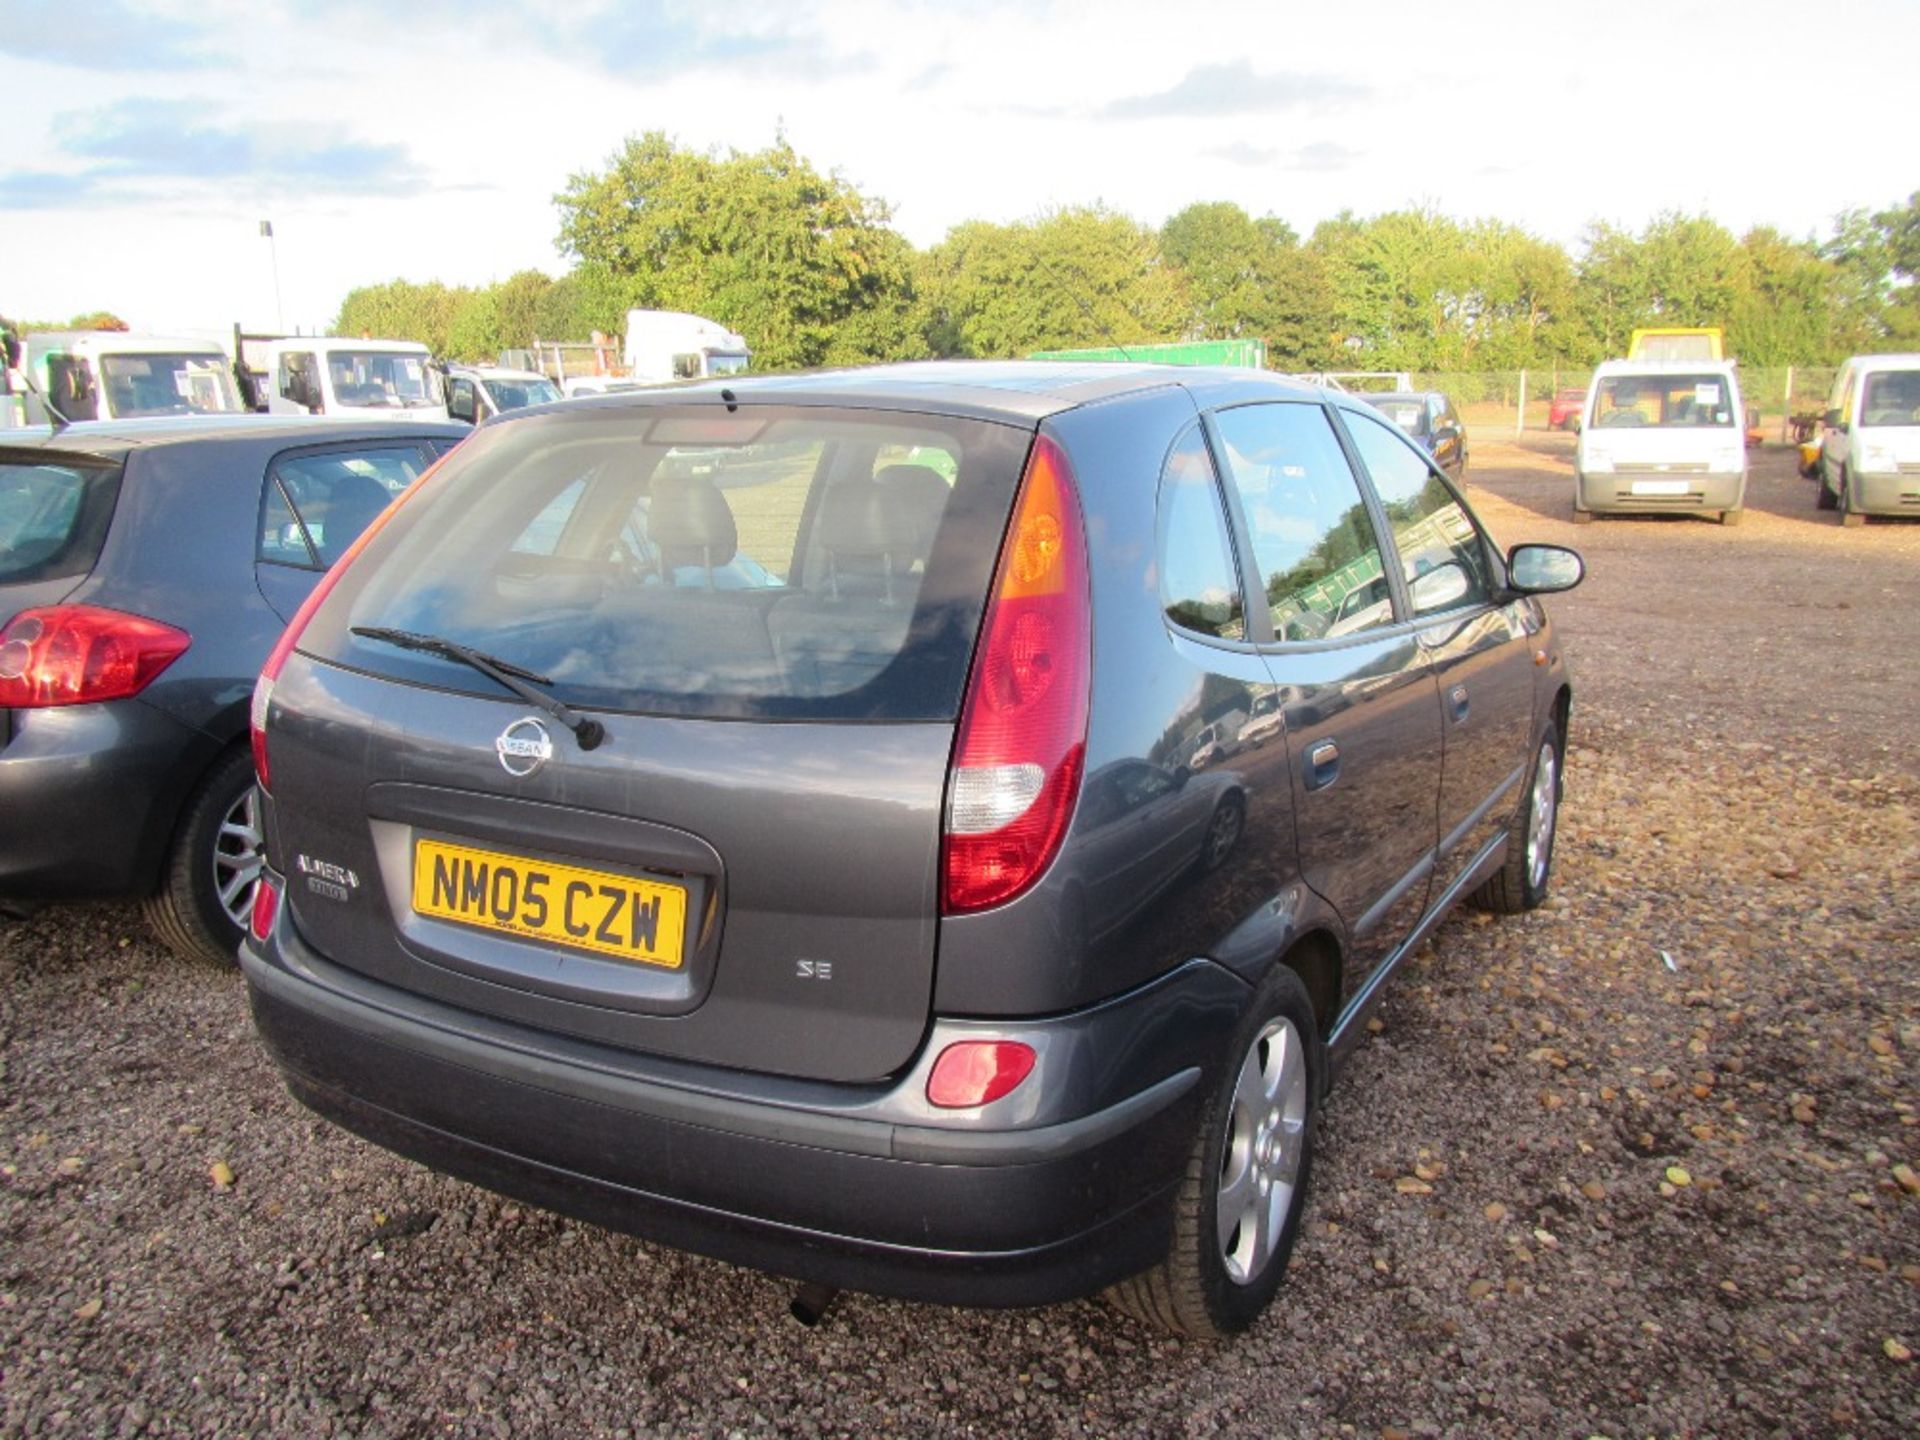 2005 Nissan Almera Tino - Spares & Repairs, Engine requires attention. Registration Documents will - Image 5 of 6